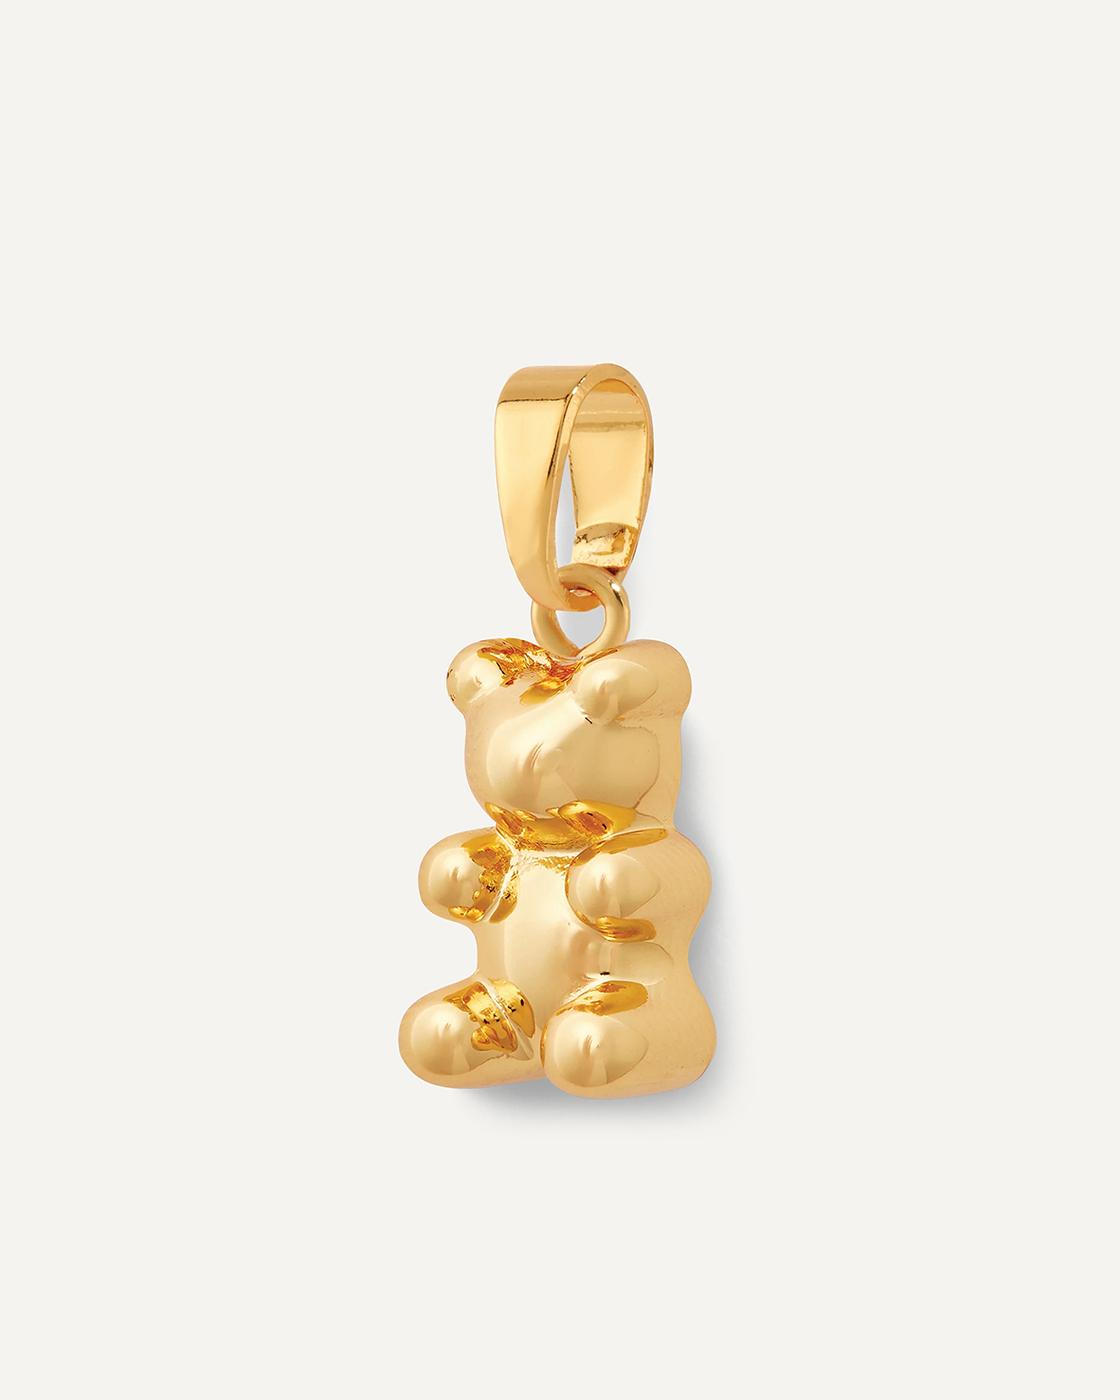 Golden Nostalgia Bear - Gold-Plated Pendant with Classic Connector